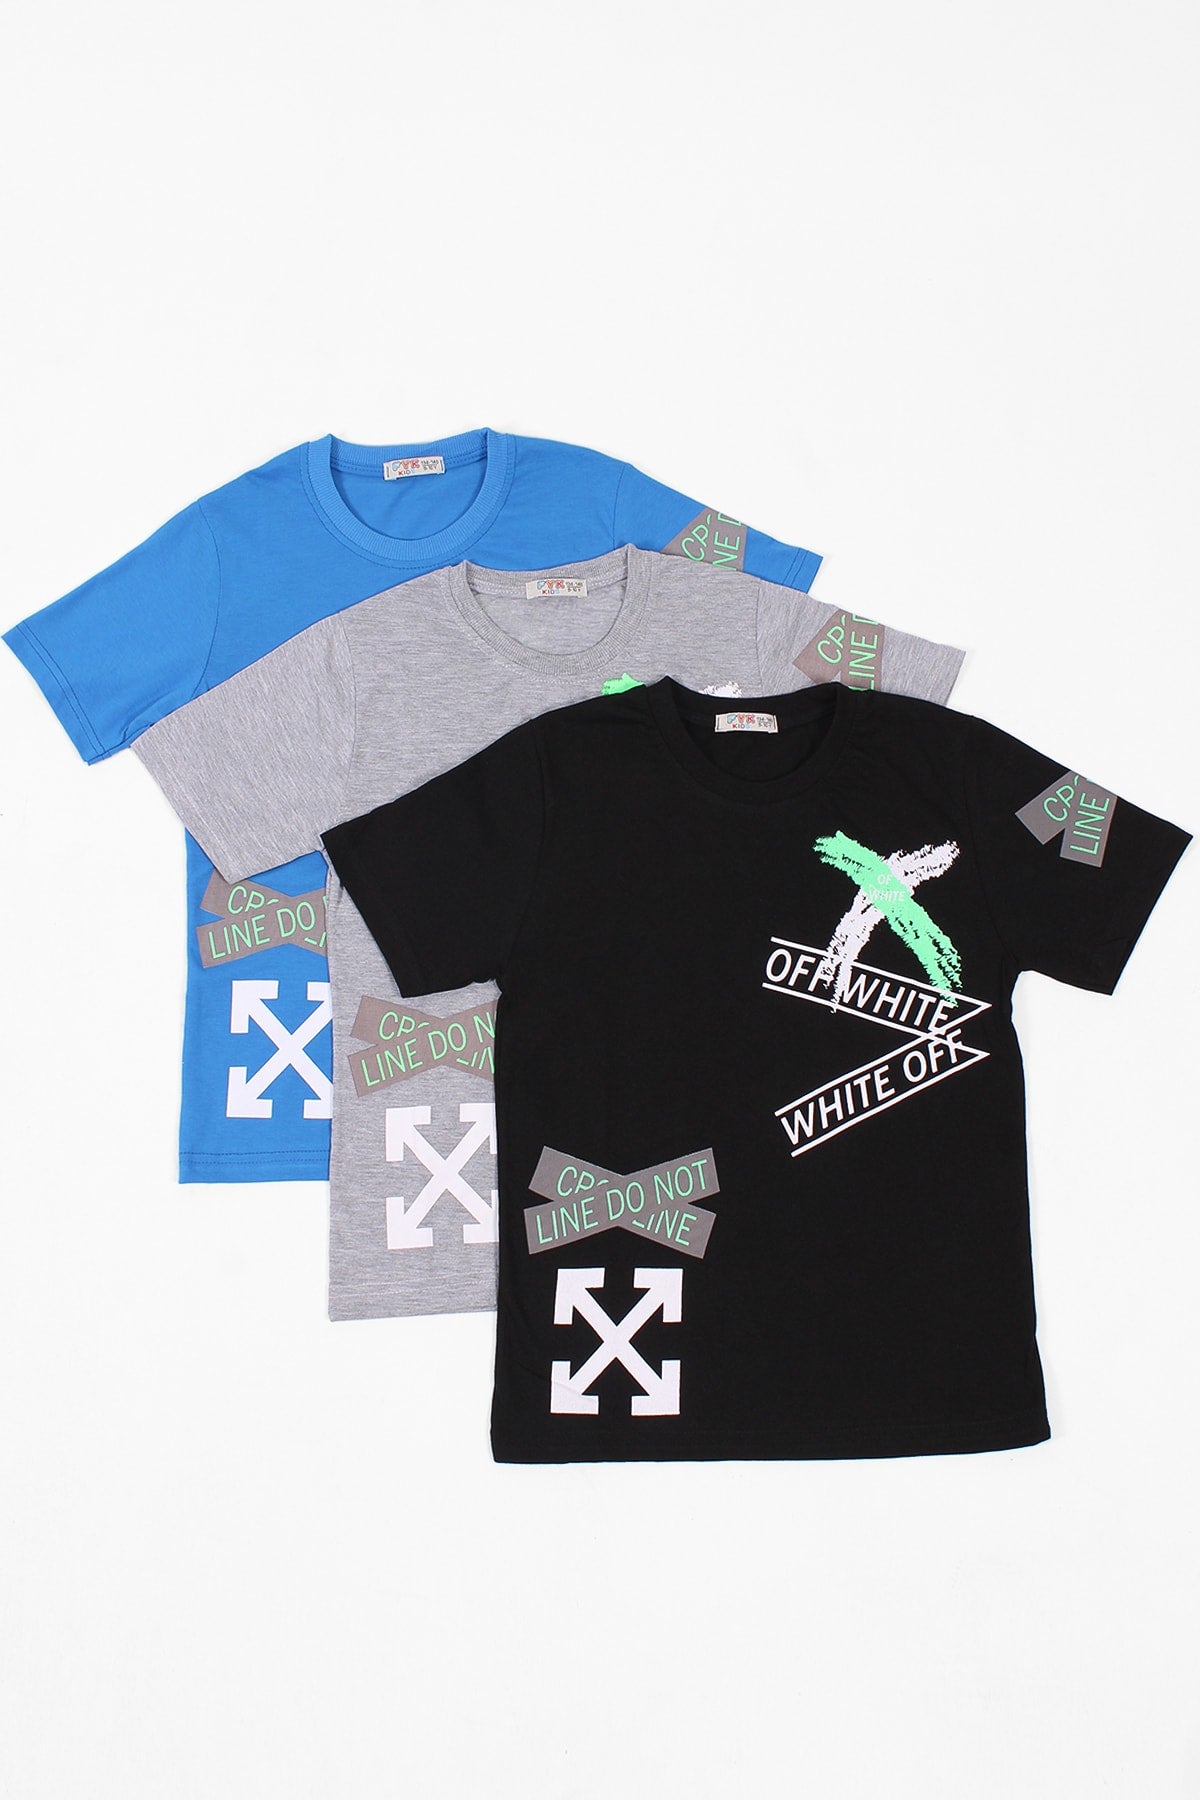 3-pack, Printed X Collection Boys Black Gray Blue T-shirt